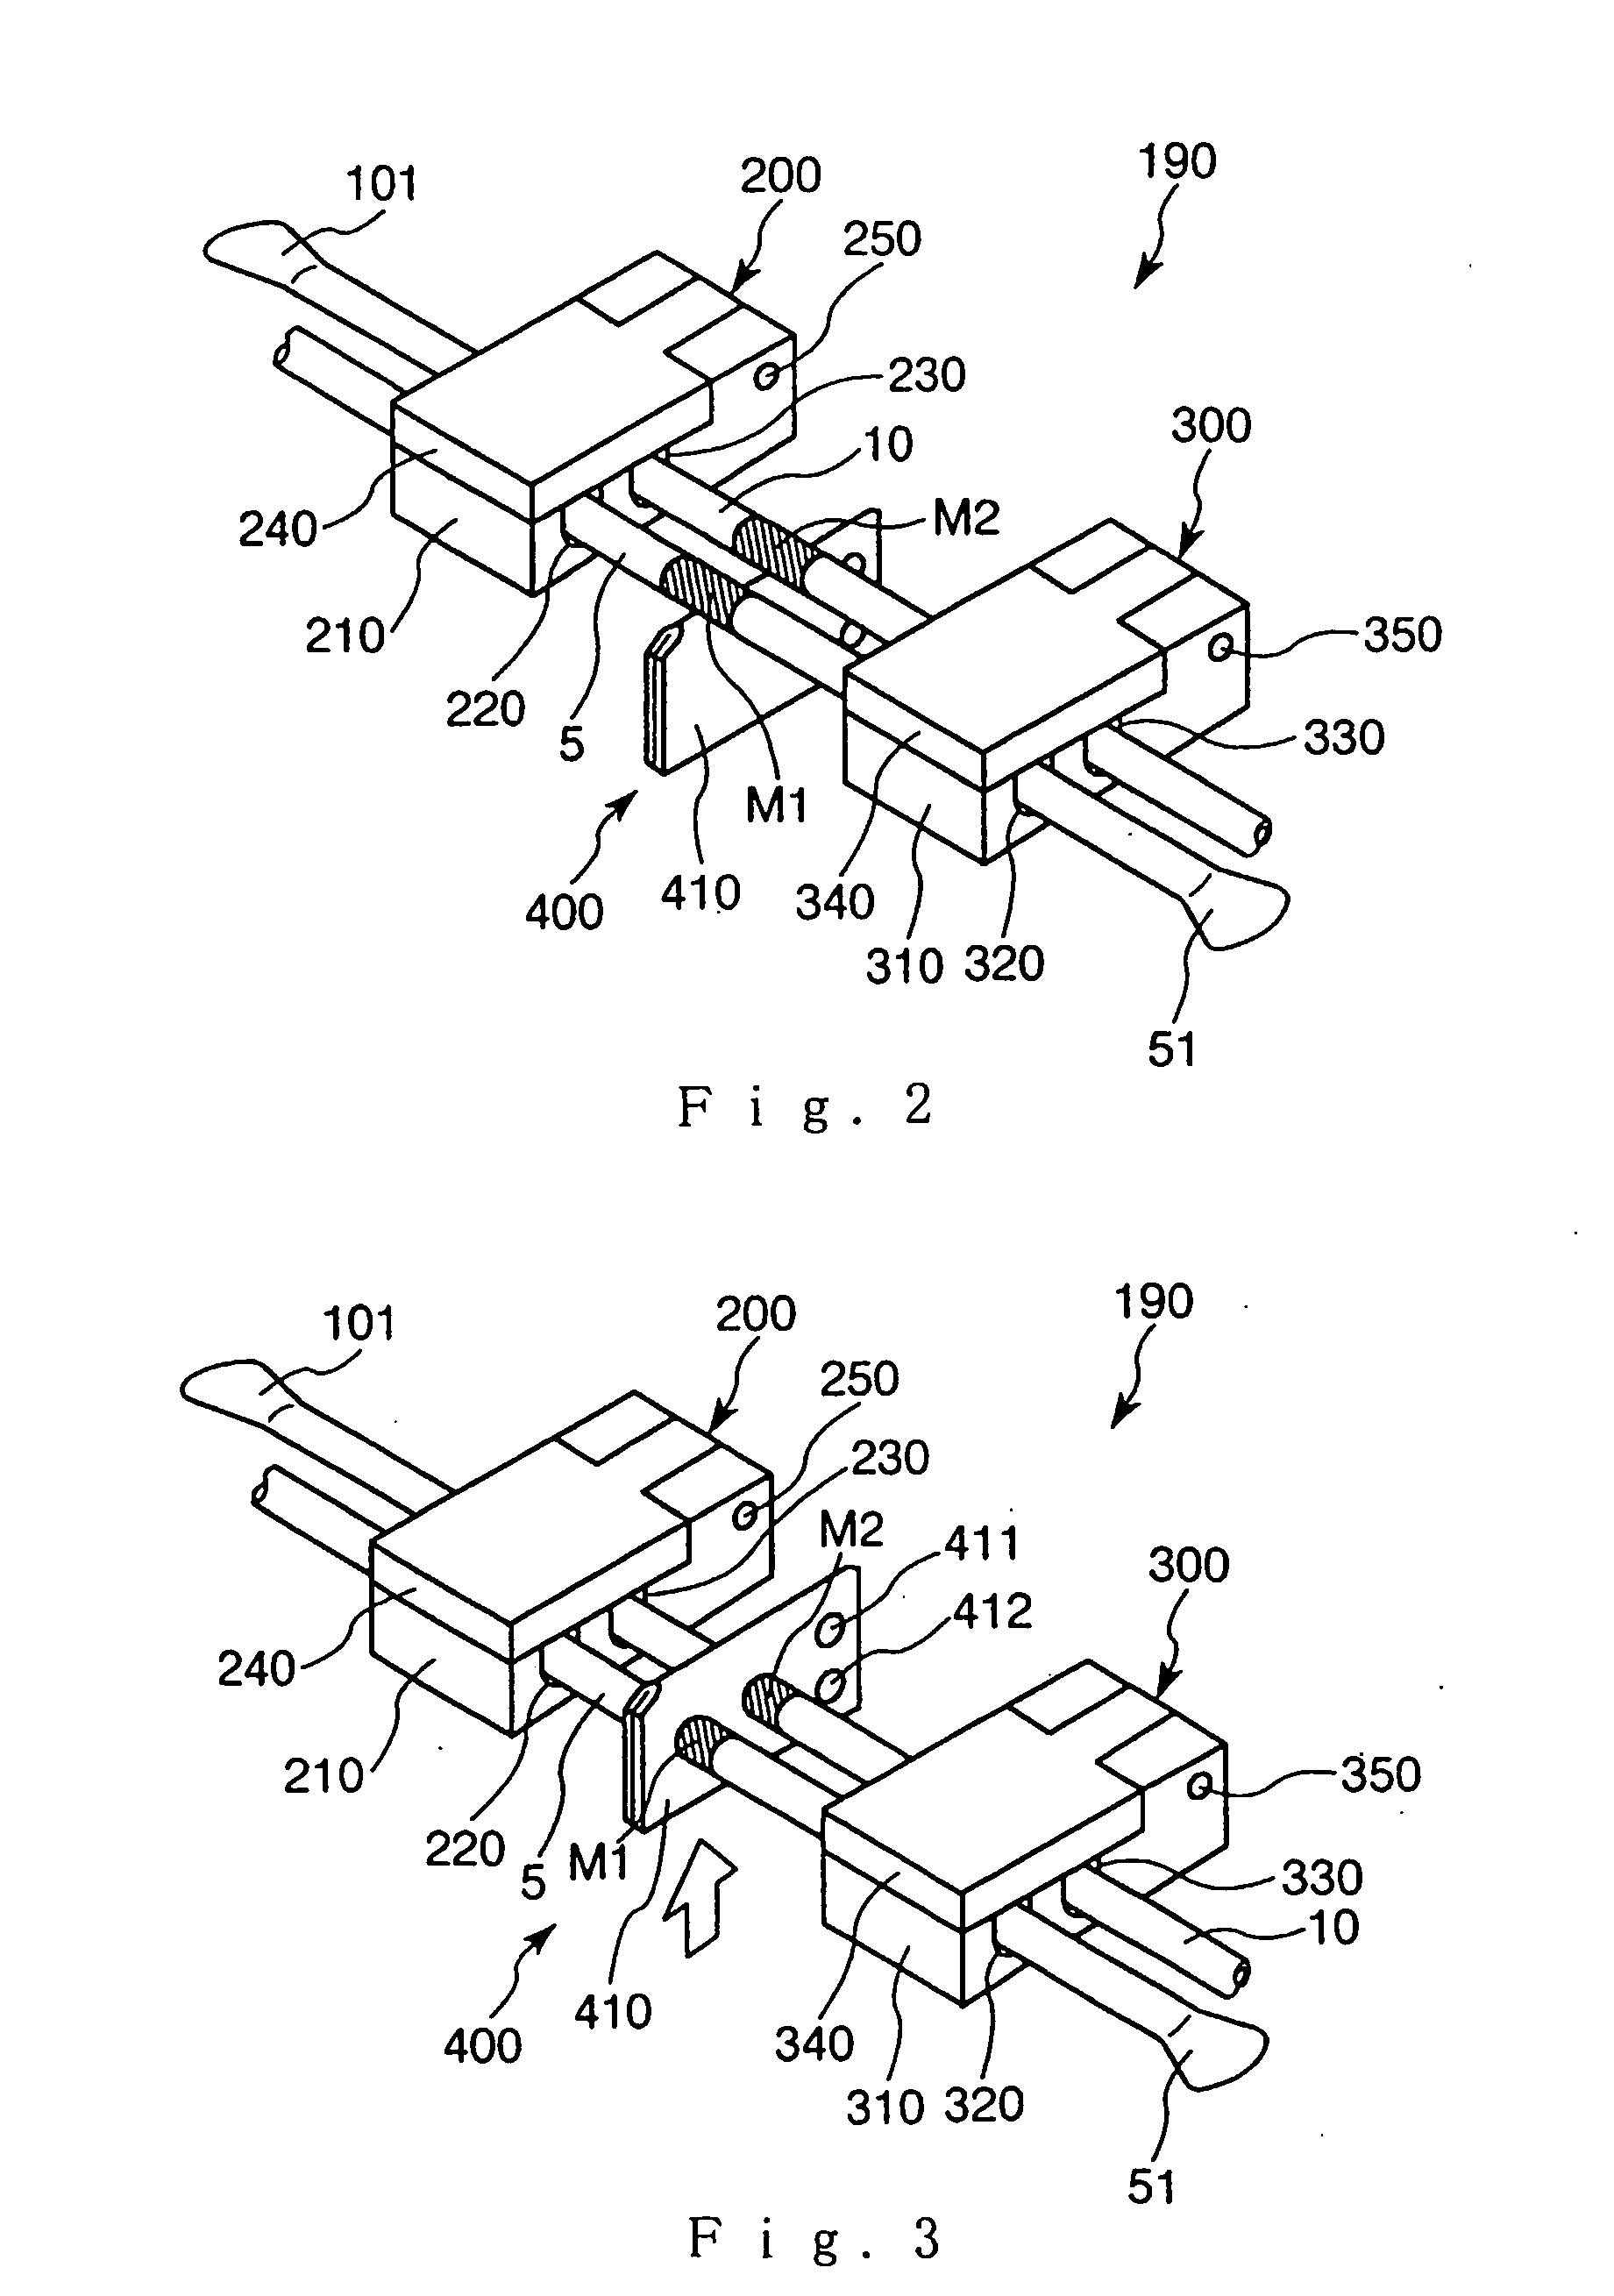 Blood treating set and cell treating set